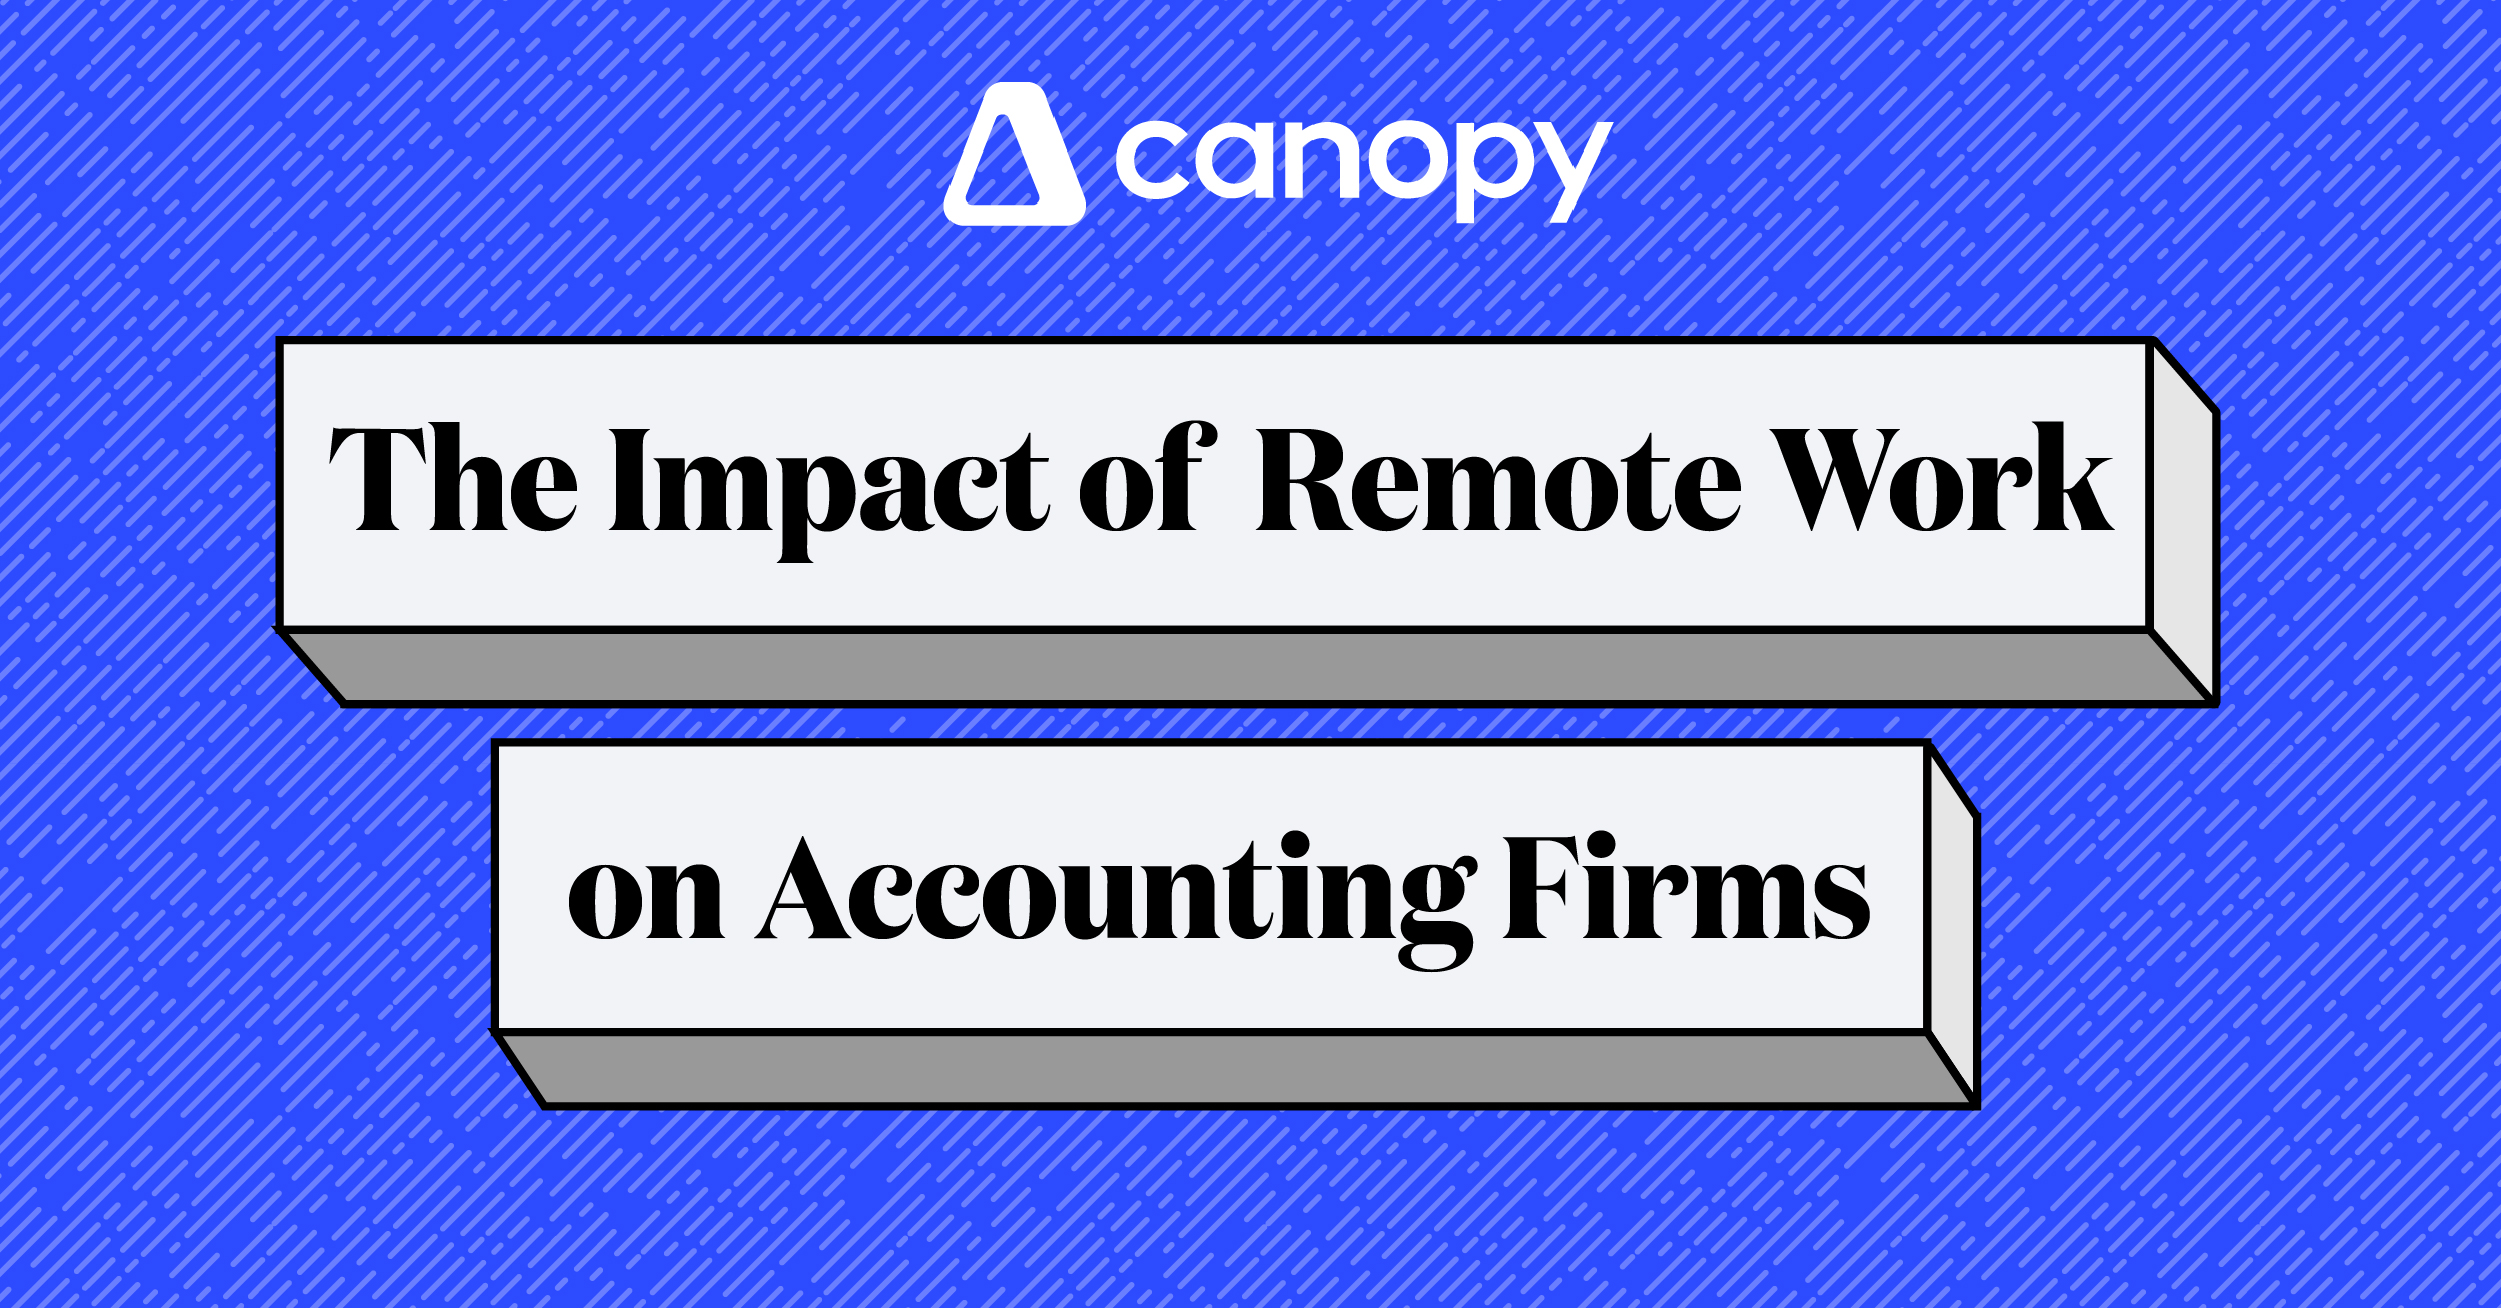 The Impact of Remote Work on Accounting Firms